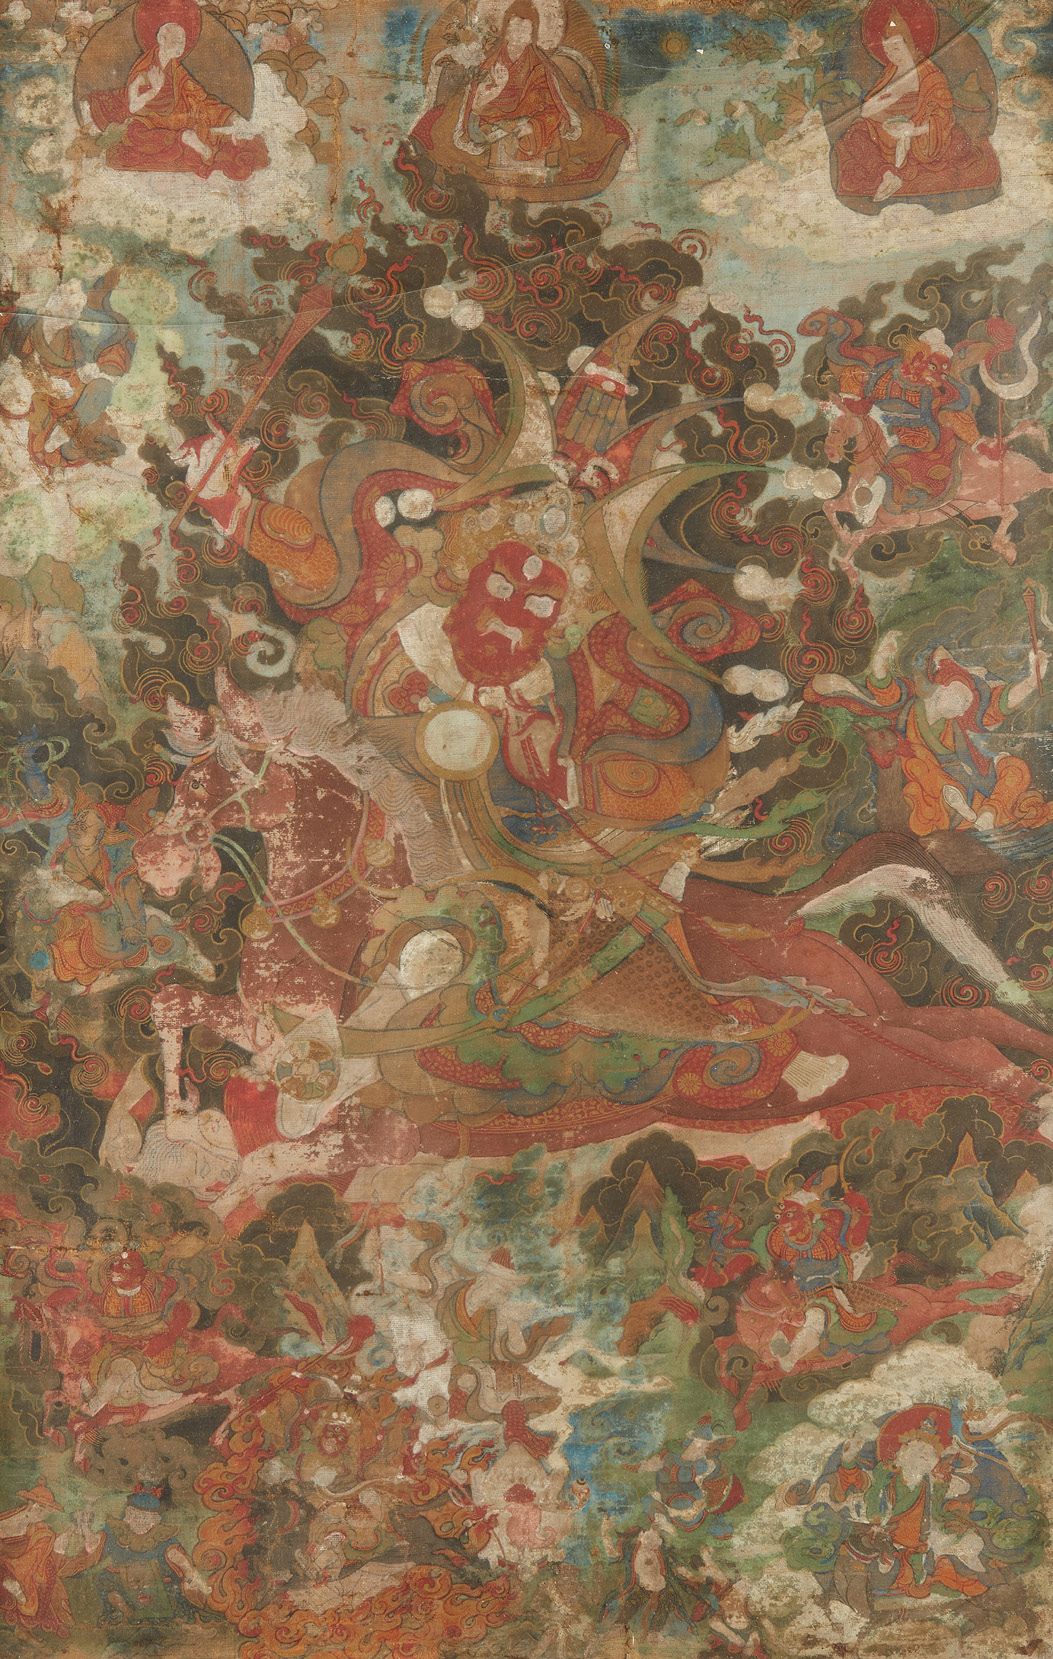 ART SINO-TIBETAIN OU NEPAL Painting on fabric treated in polychrome representing&hellip;